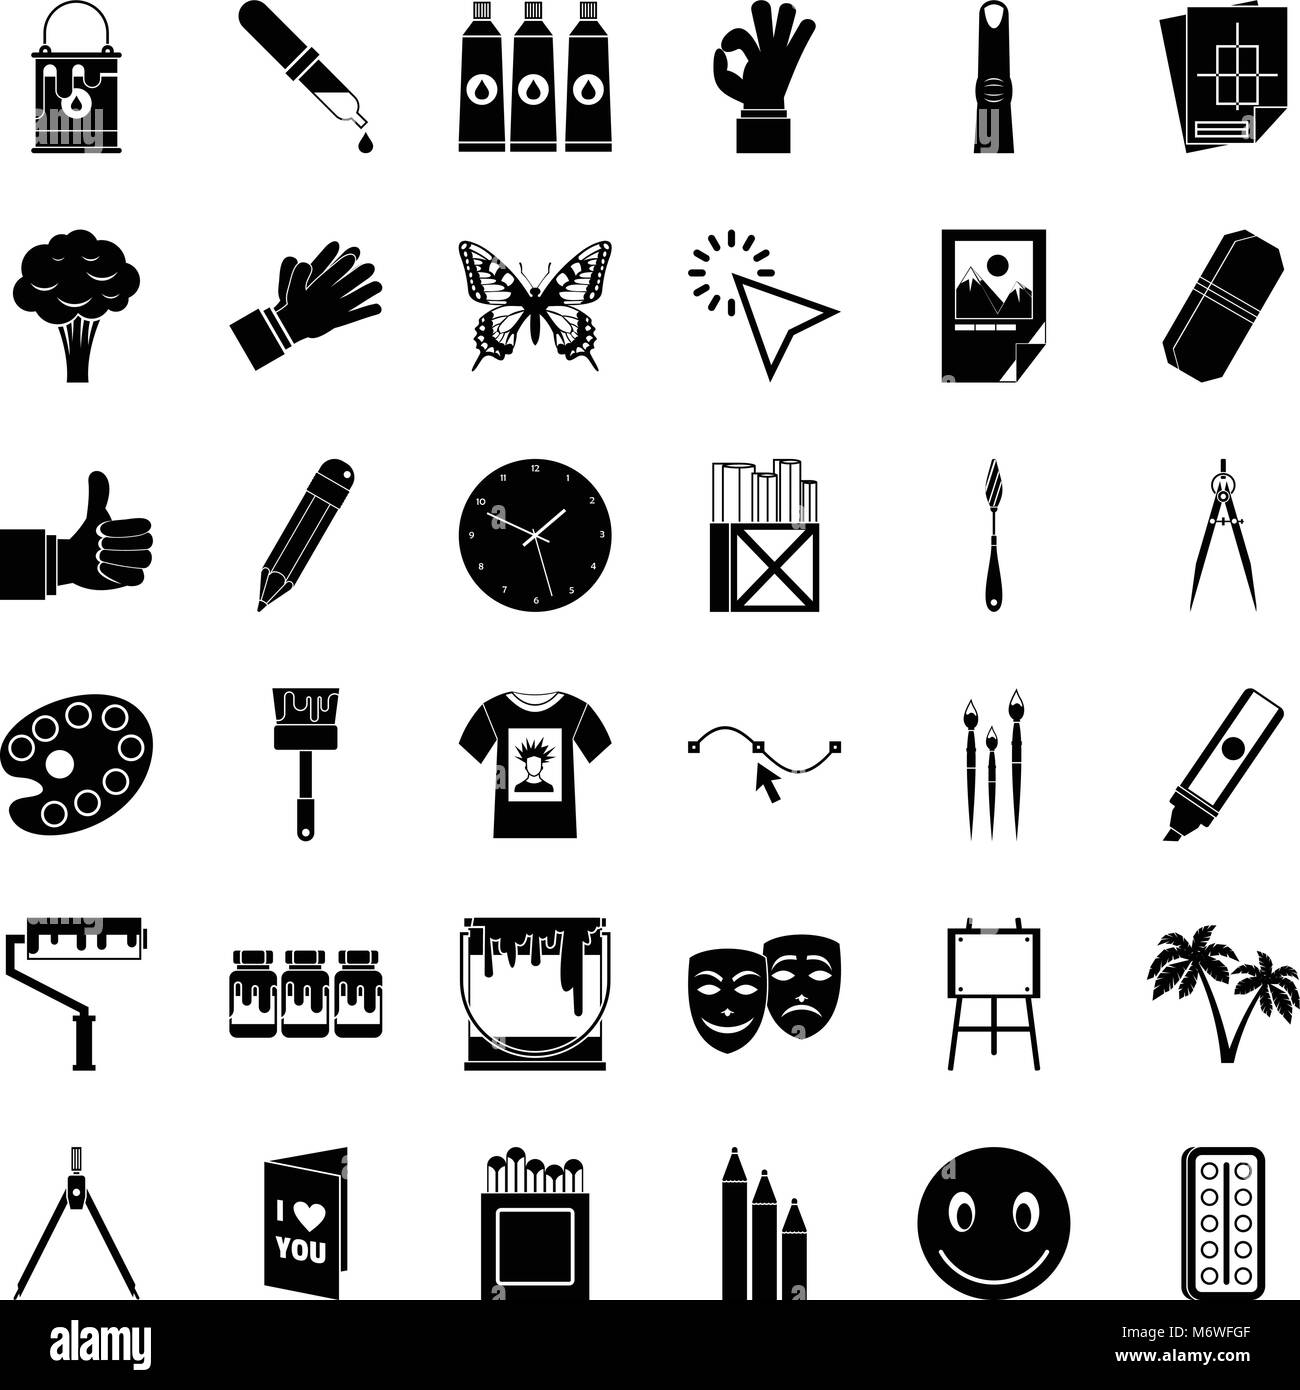 Paint material icons set, simple style Stock Vector